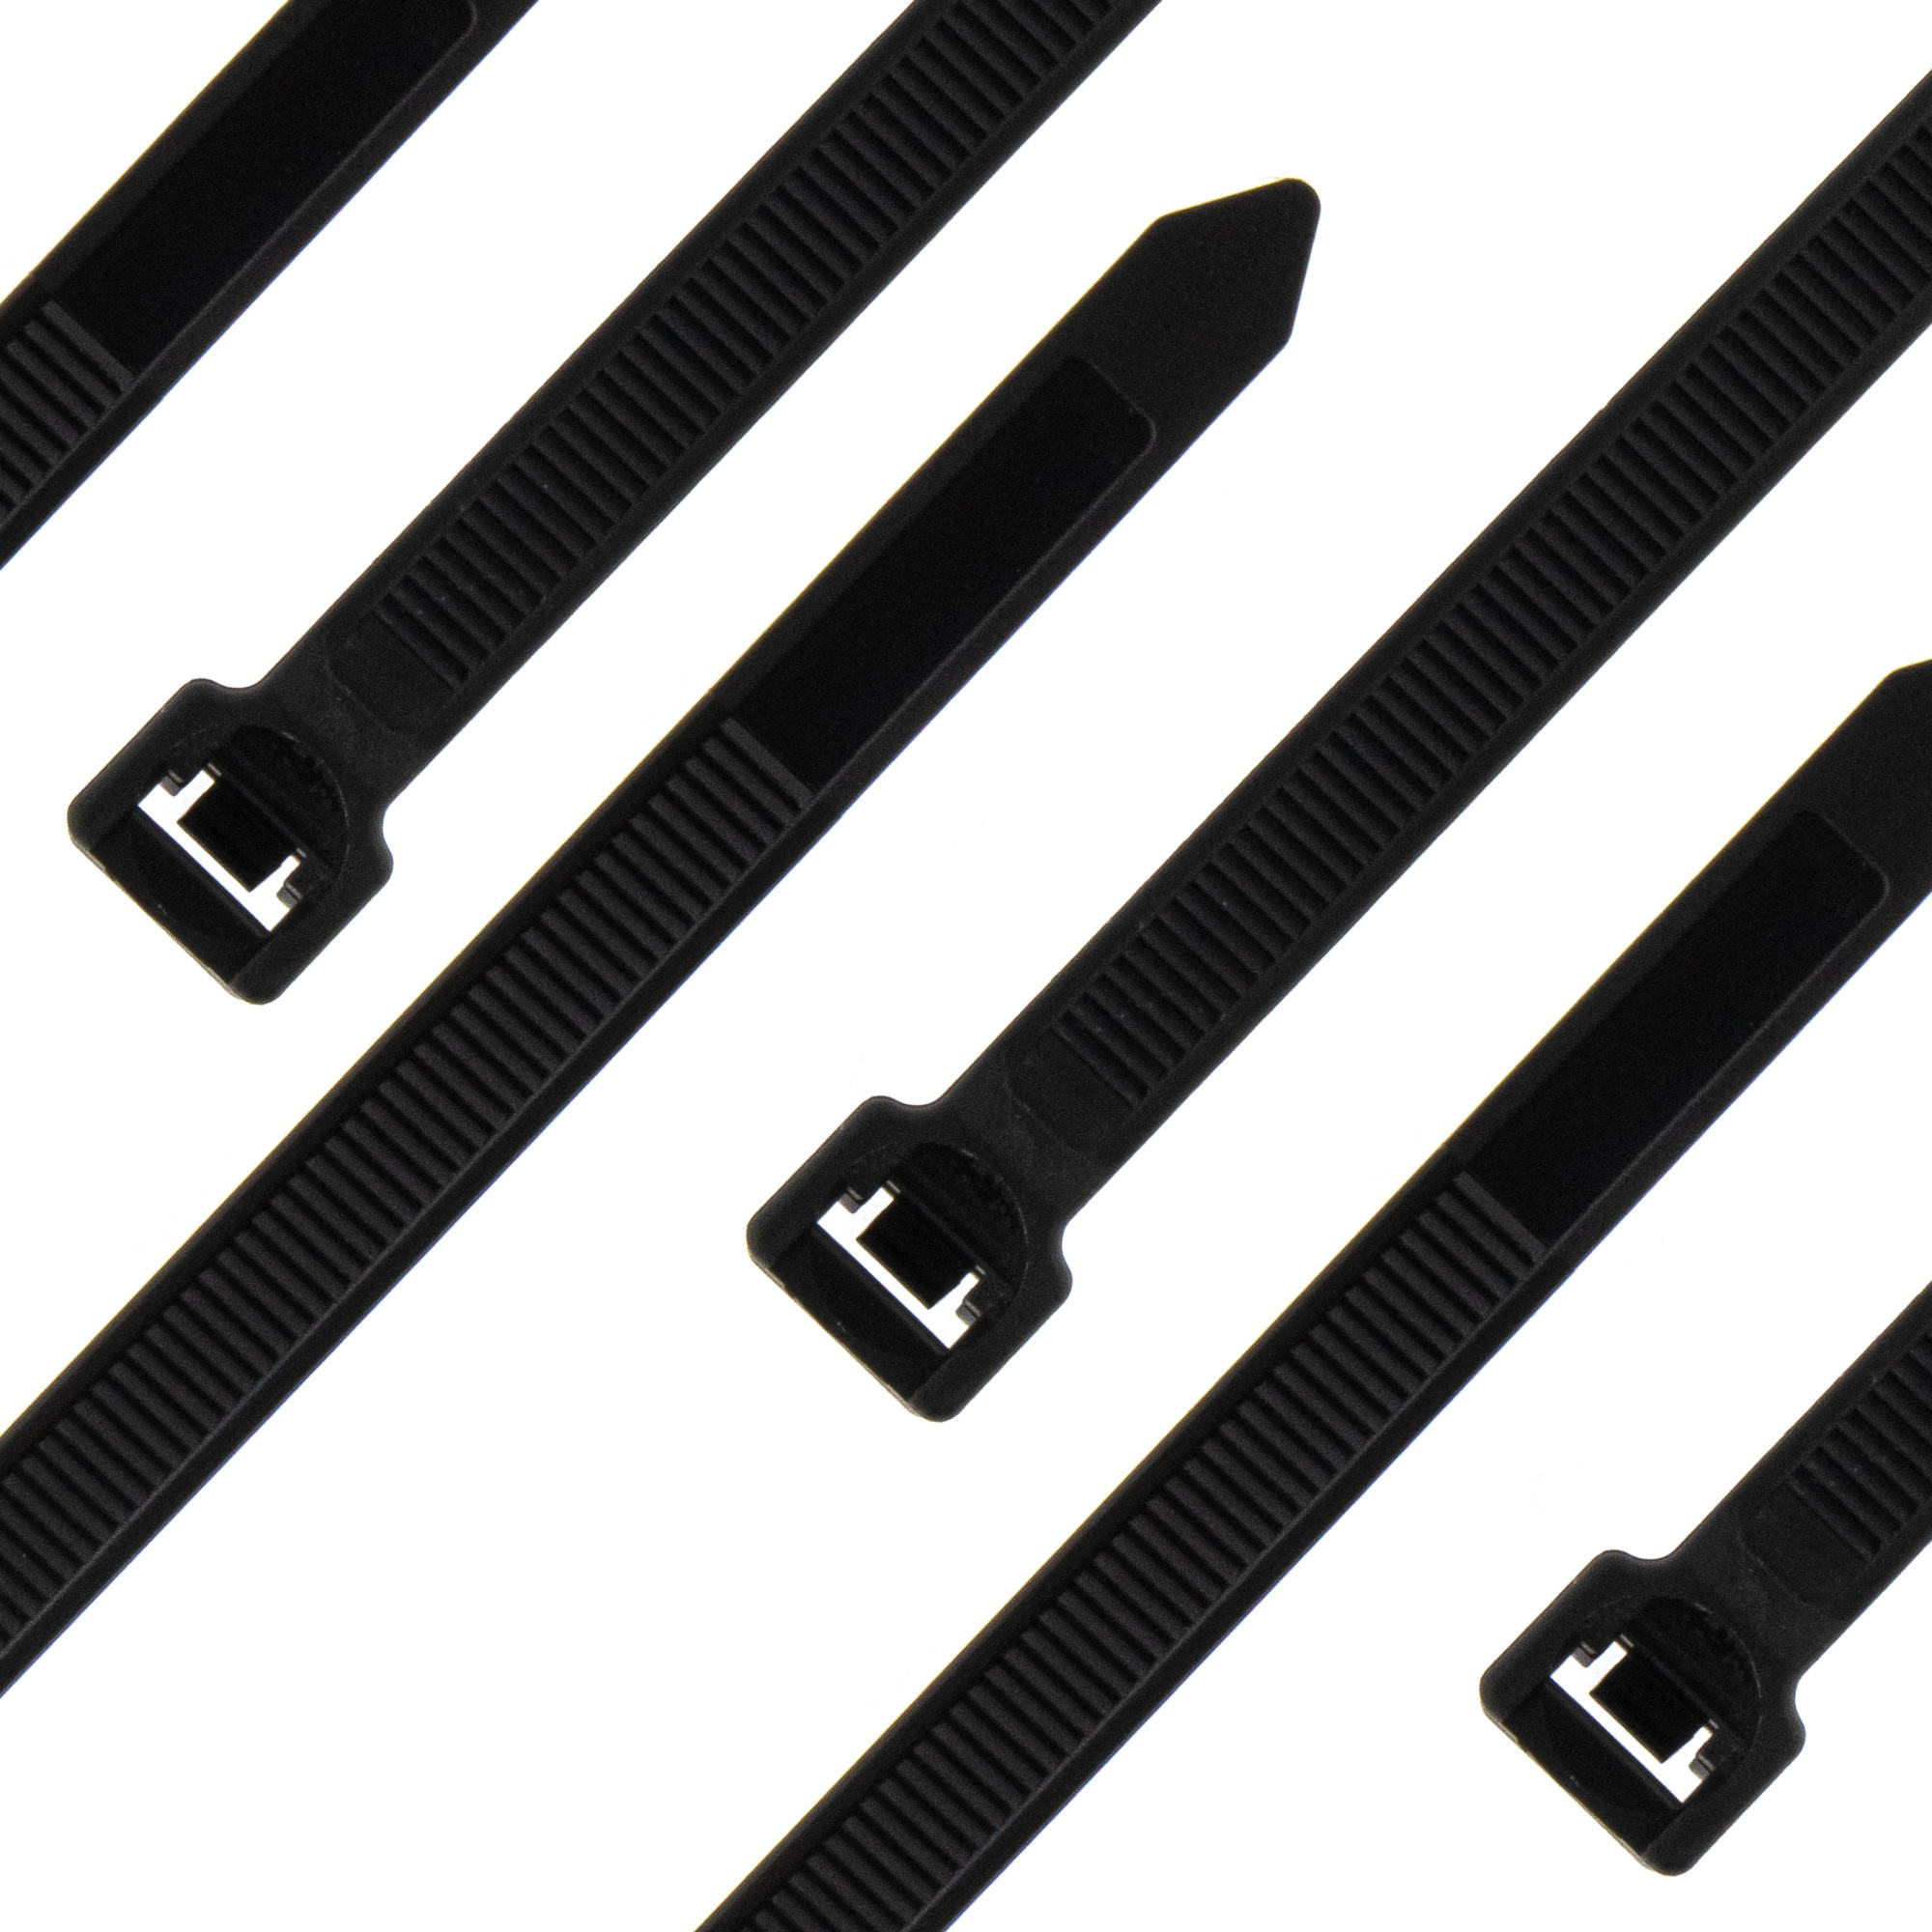 Cable tie re-use-able 450 x 9,0mm, black, 100PCS